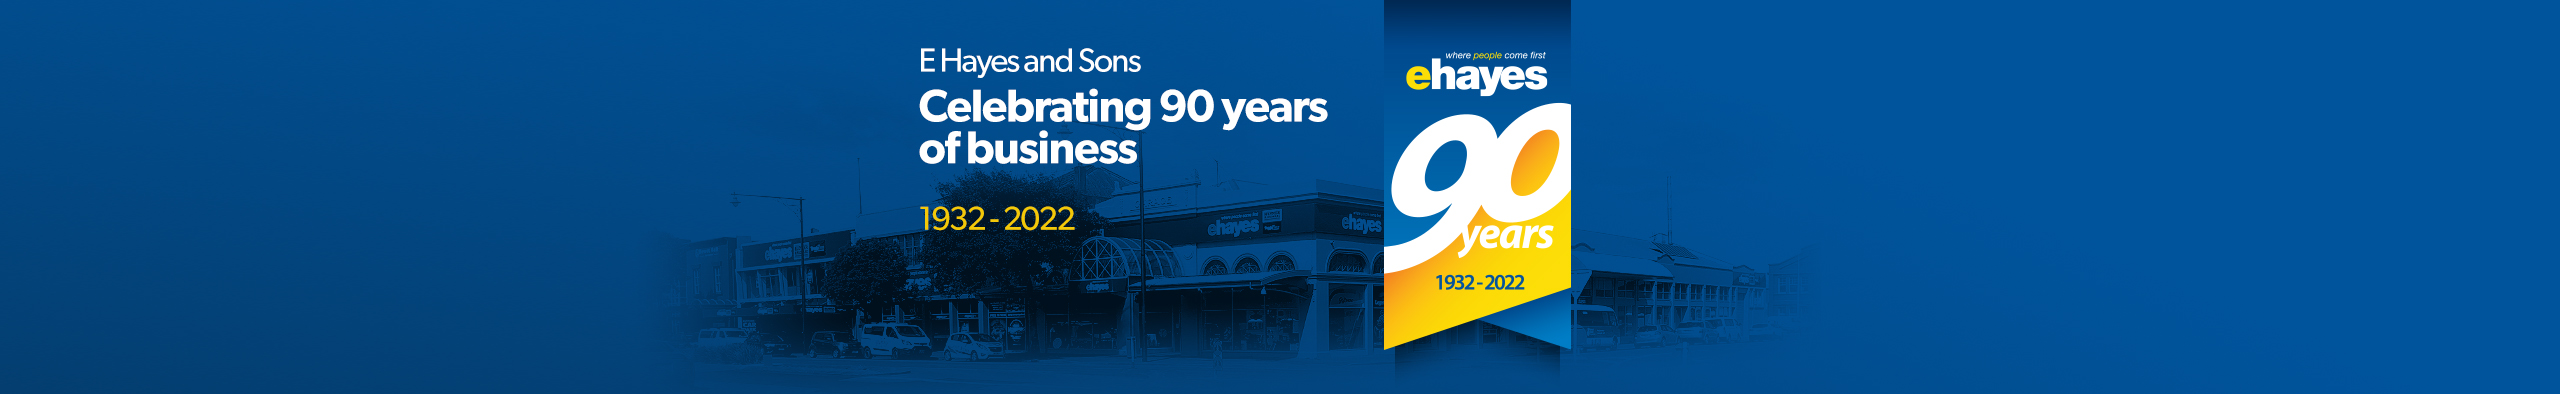 E Hayes and Sons. Celebrating 90 years in business 1932 - 2022